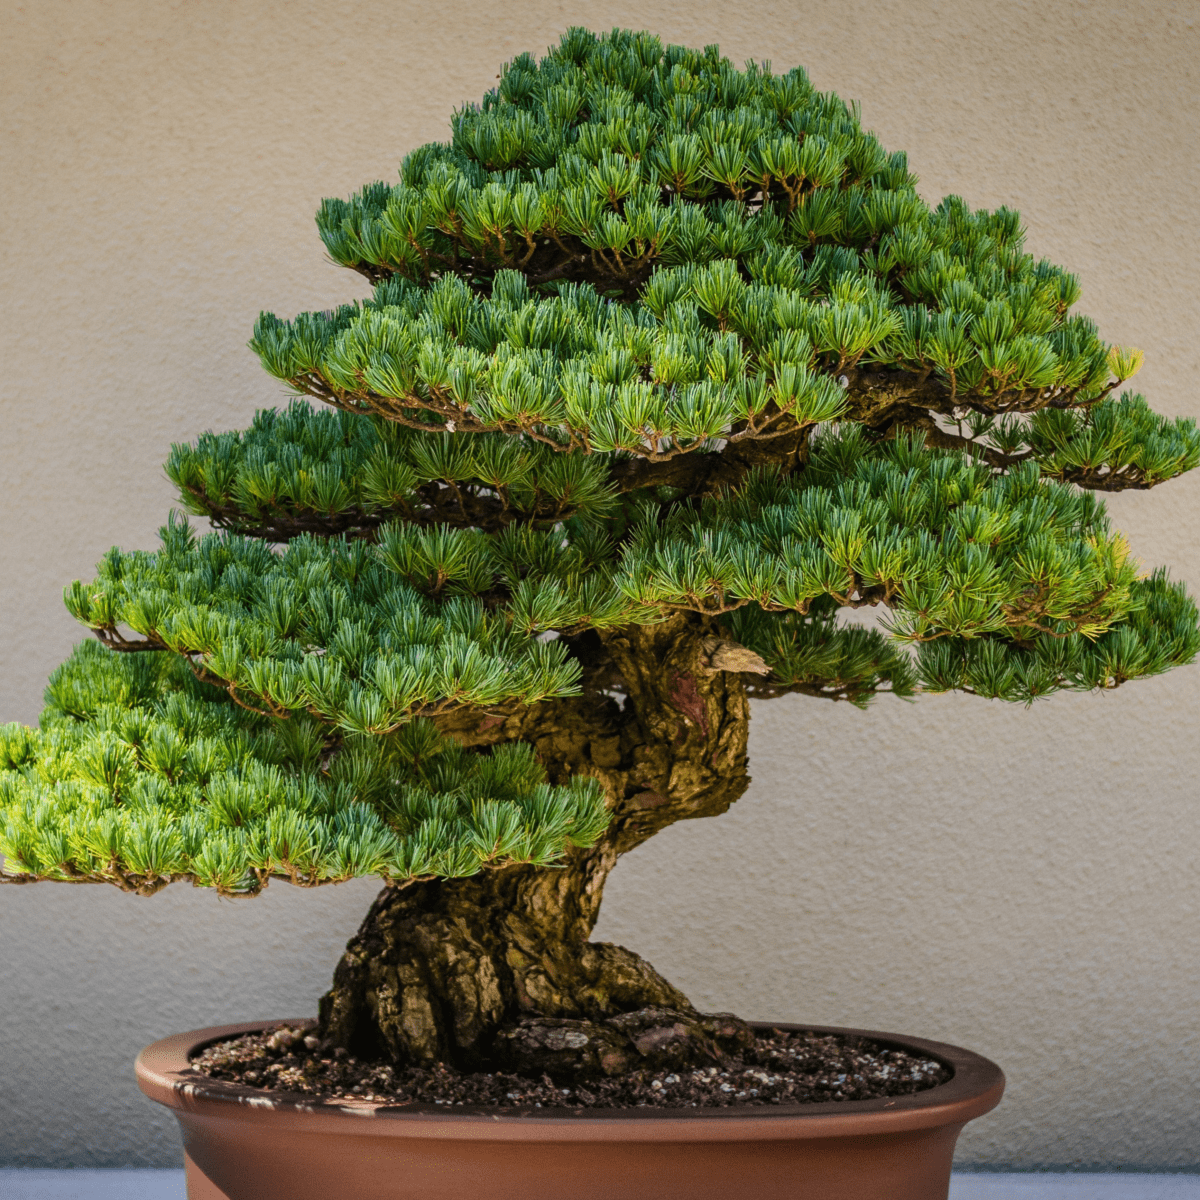 Bonsai Tree Care: Tips and Techniques for Healthy, Thriving